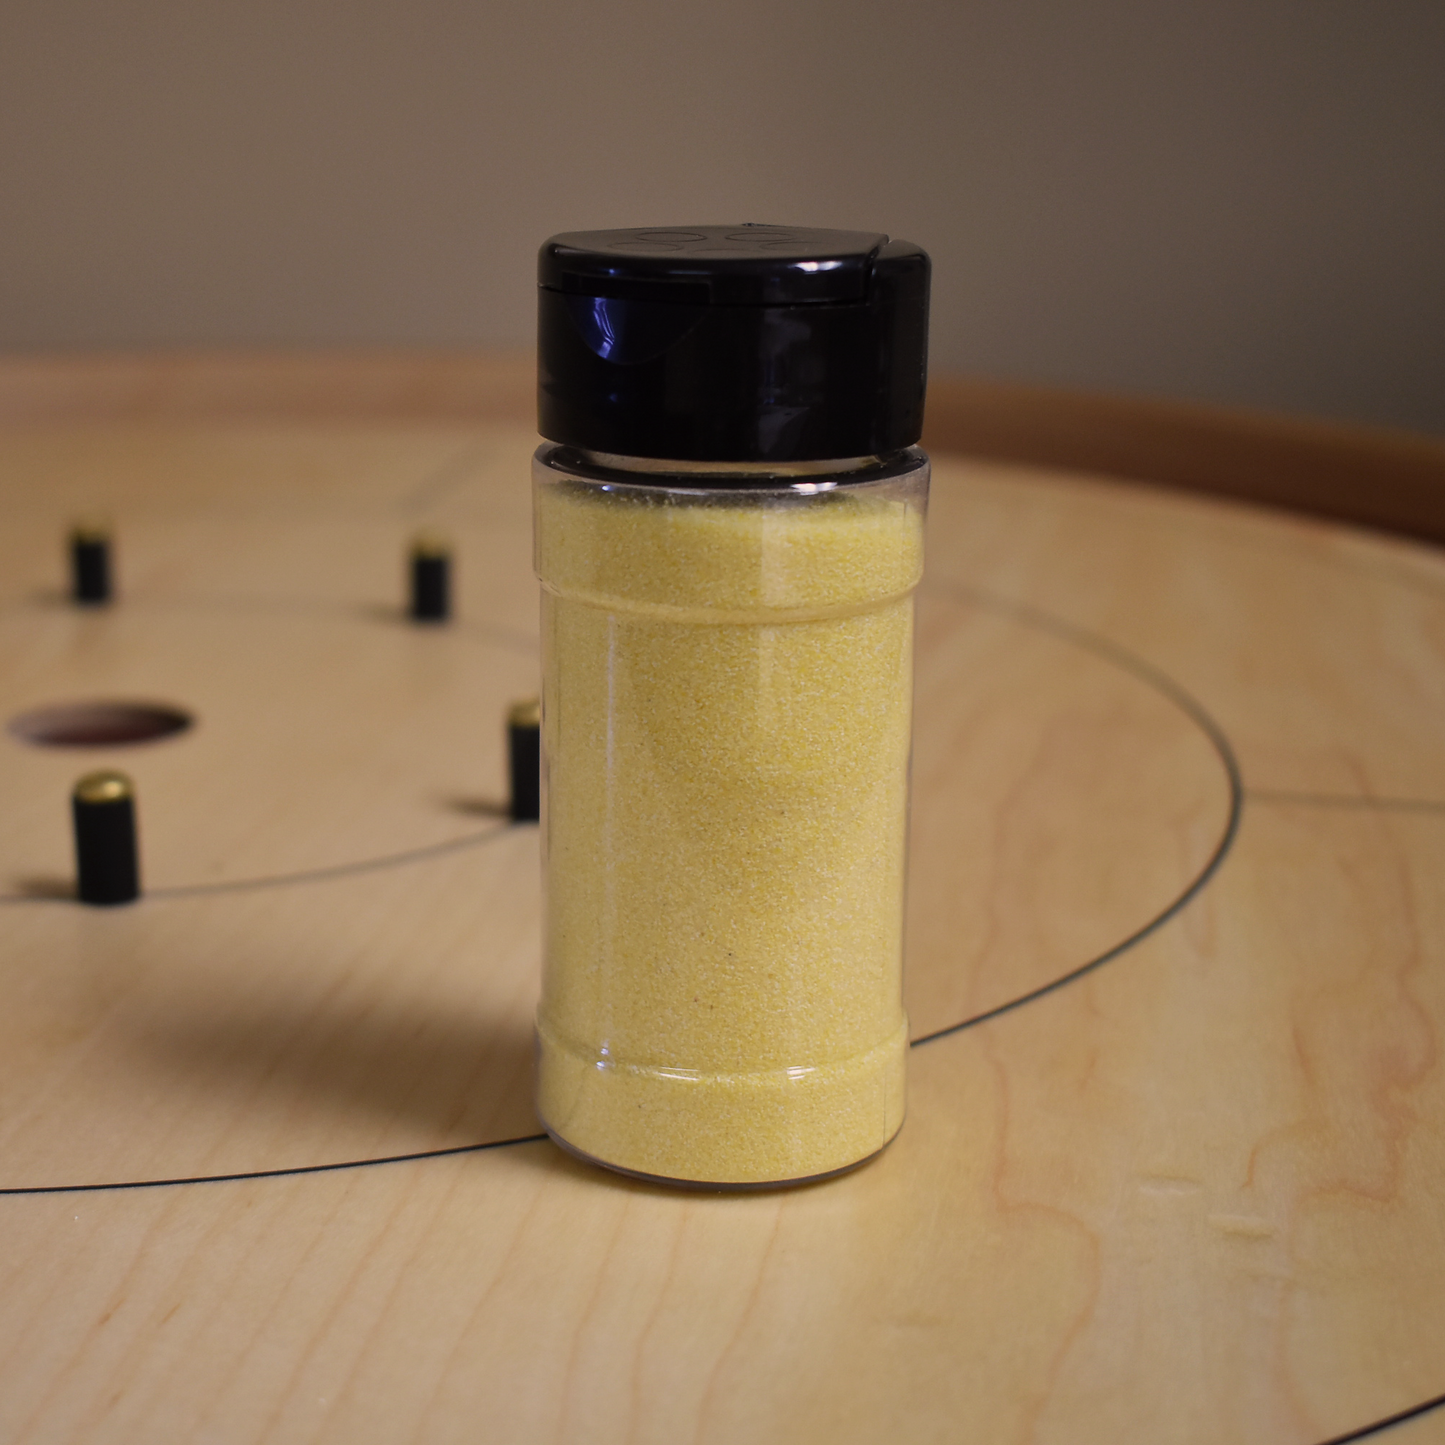 The Baltic Bircher (With Scoring Numbers) - Large Traditional Crokinole Board Game Set